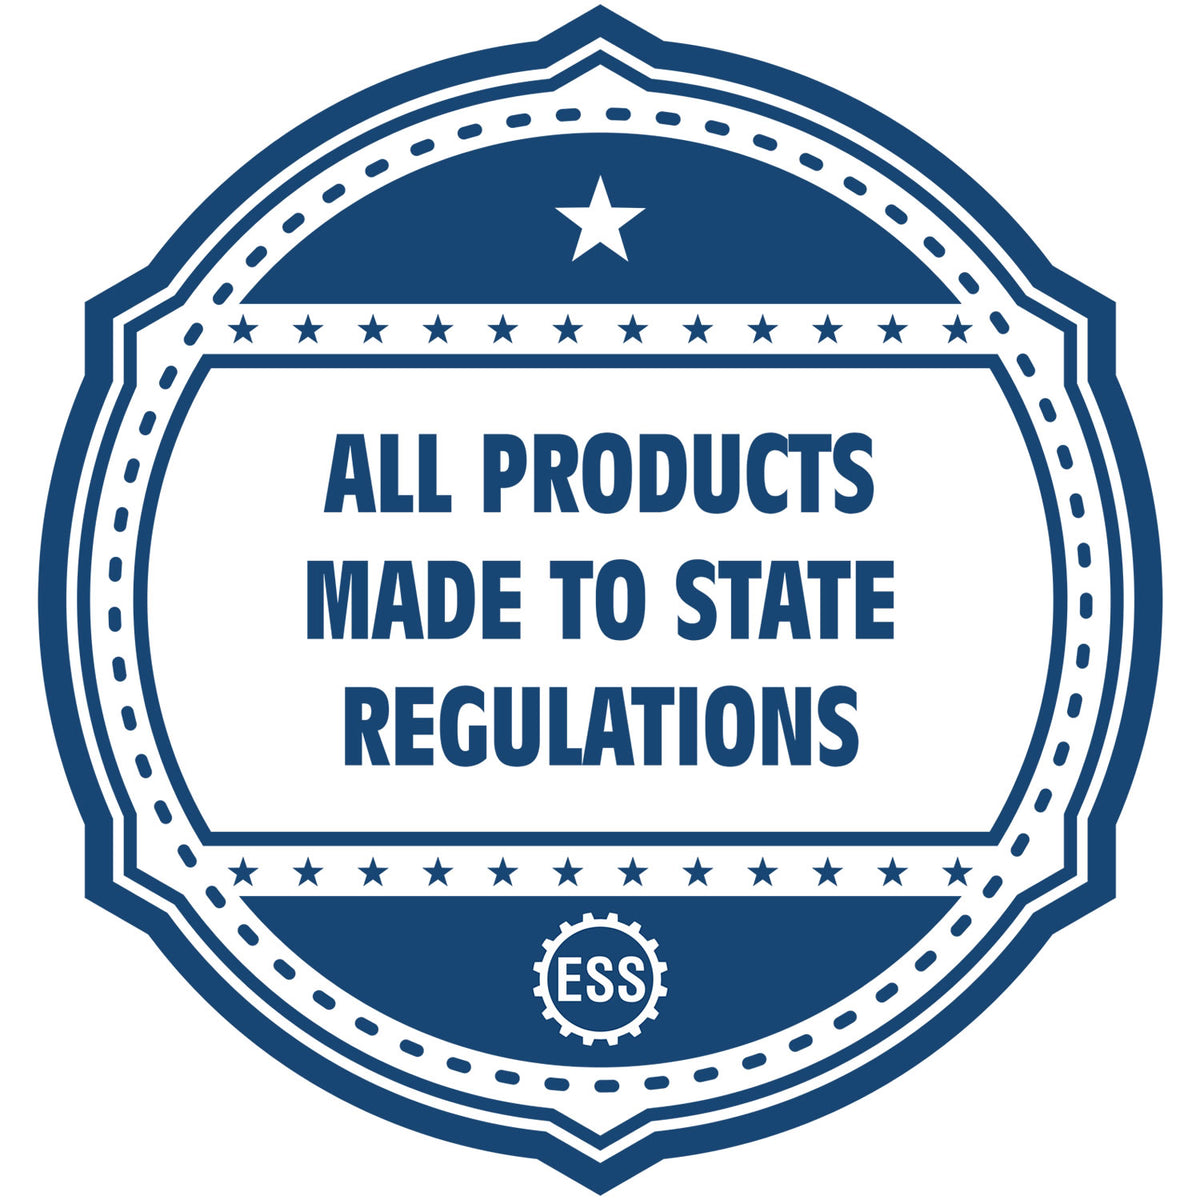 A blue icon or badge for the Slim Pre-Inked Delaware Professional Geologist Seal Stamp showing that this product is made in compliance with state regulations.